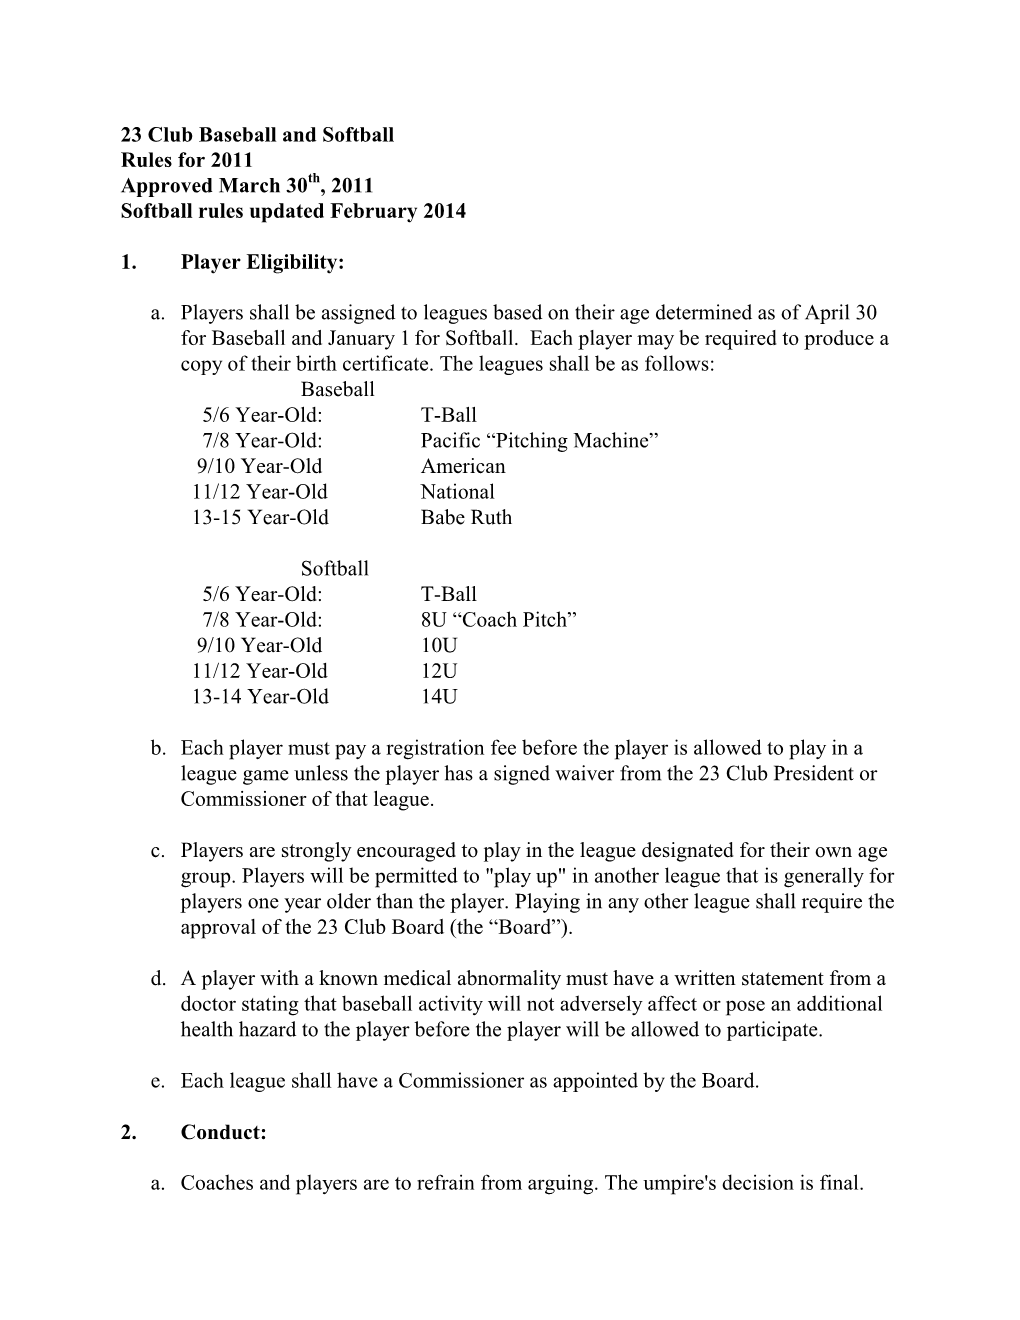 23 Club Baseball and Softball Rules for 2011 Approved March 30Th, 2011 Softball Rules Updated February 2014